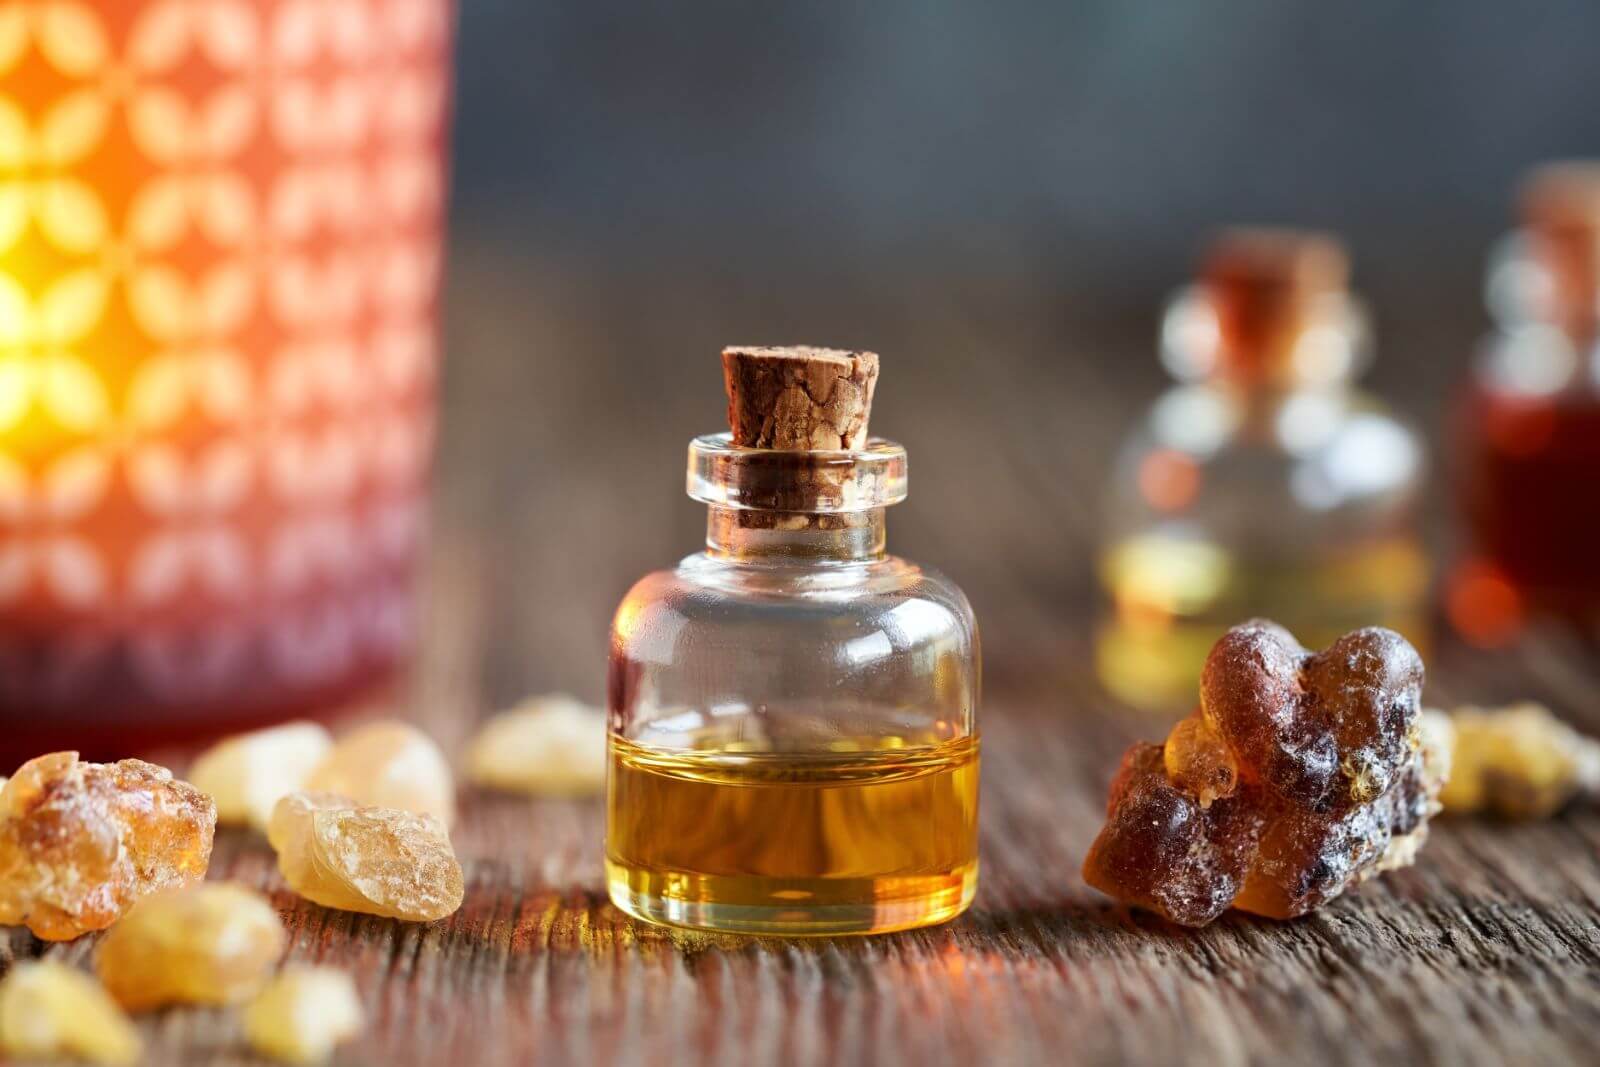 Frankincense Incense And Essential Oils: Benefits And Meaning